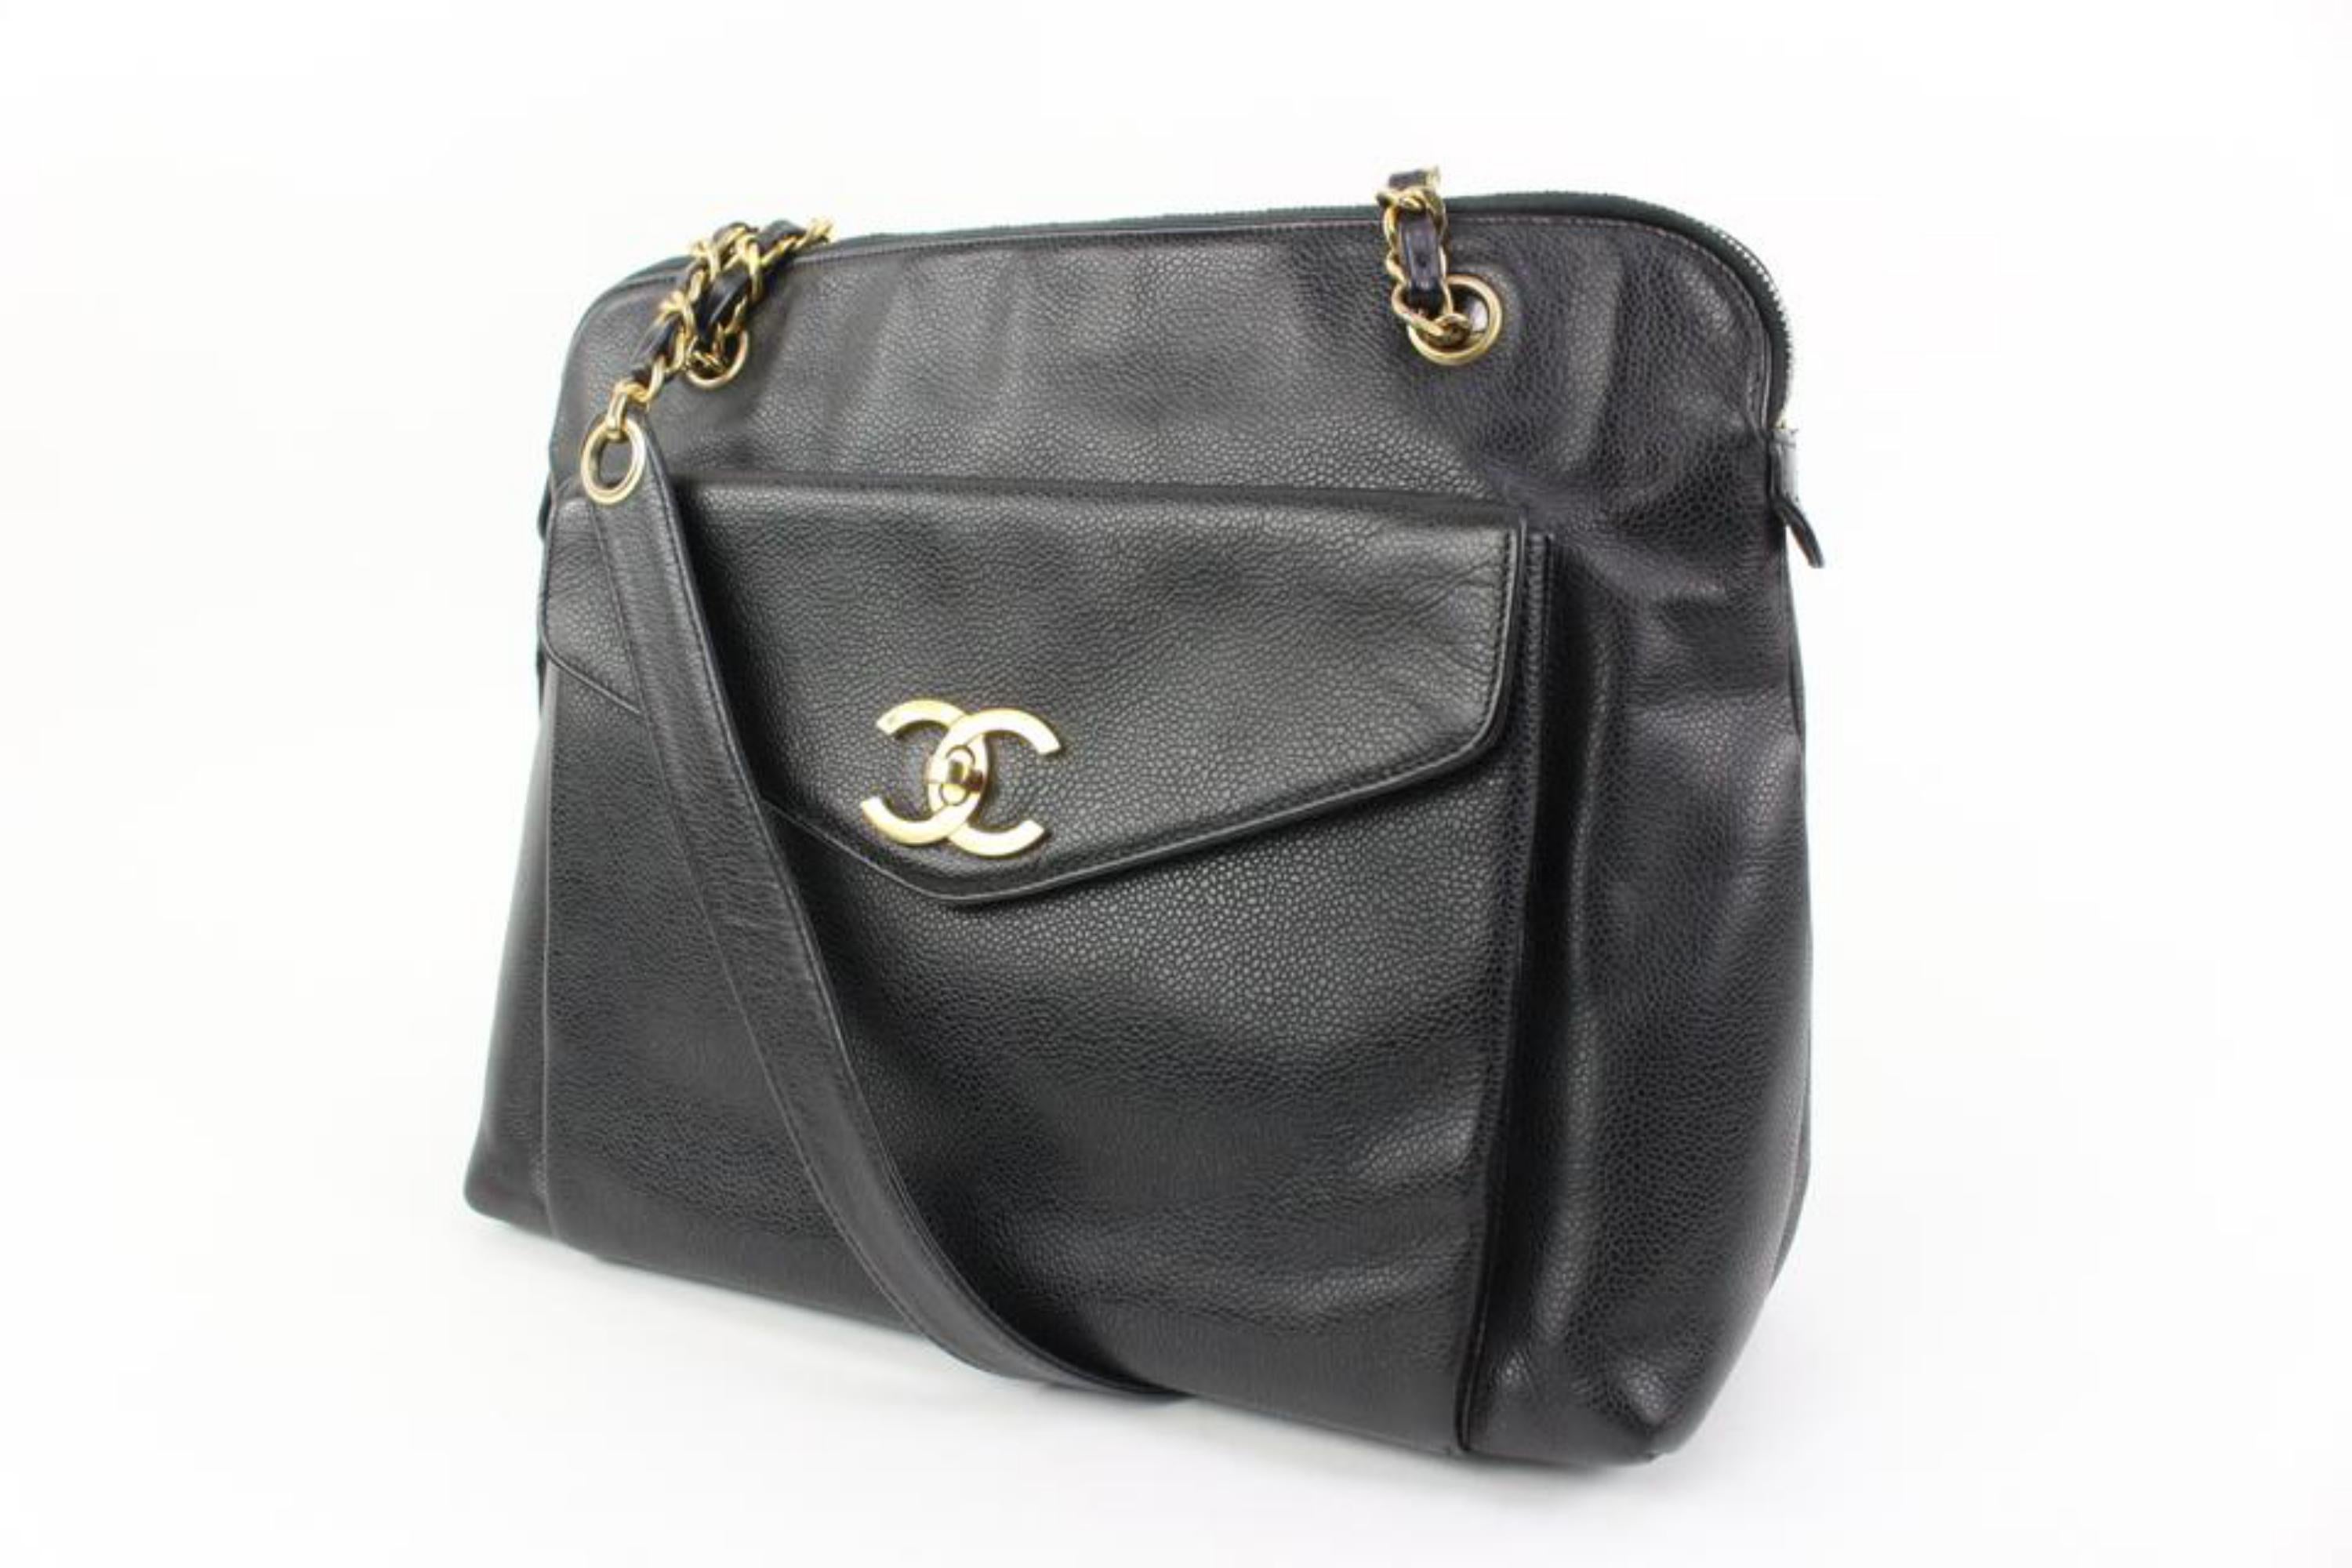 Chanel Black Caviar Leather CC Turnlock Zip Tote Shoulder Bag 54ck315s
Made In: Italy
Measurements: Length:  14.5